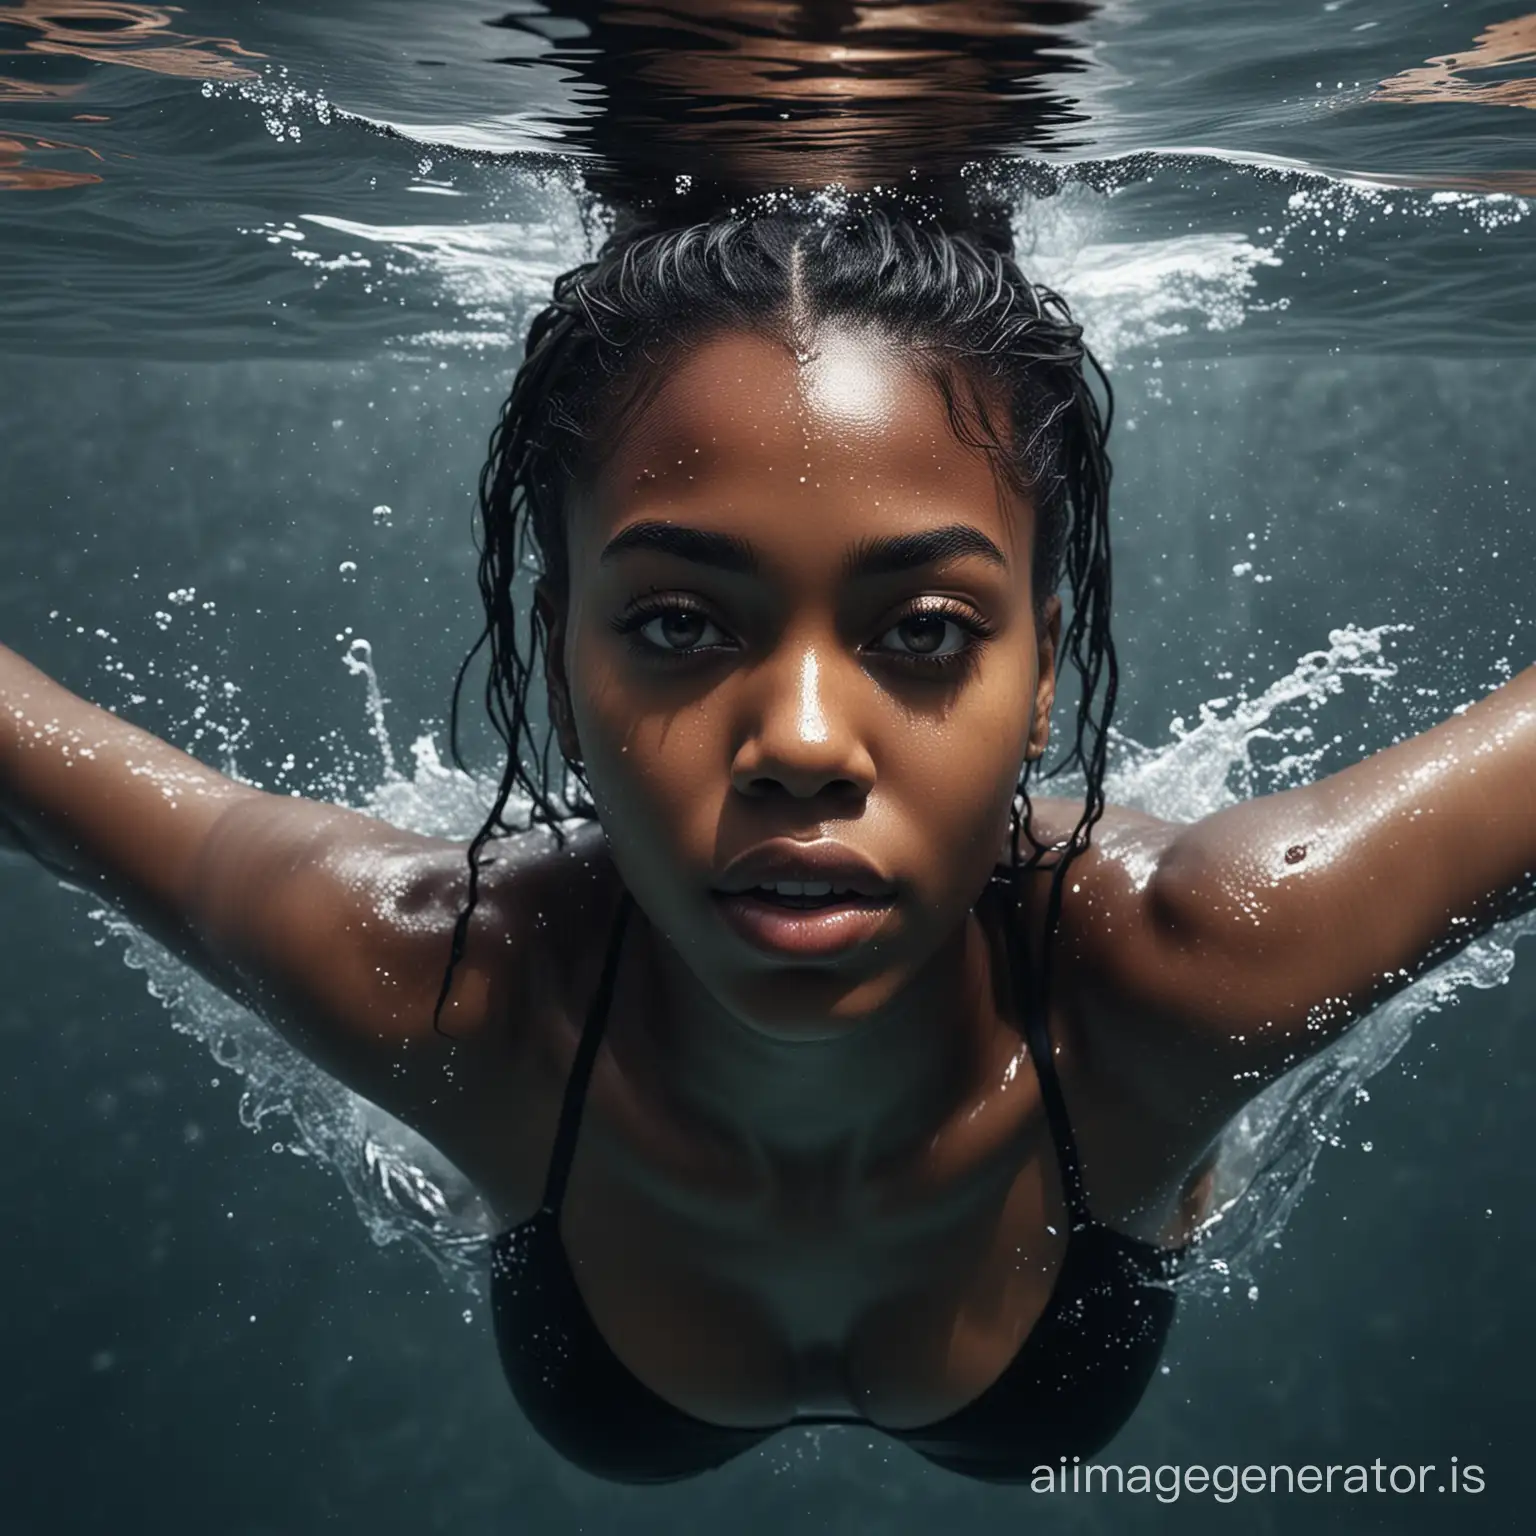 HyperRealistic-8K-Illustration-Young-Girl-Submerged-in-Deep-Waters